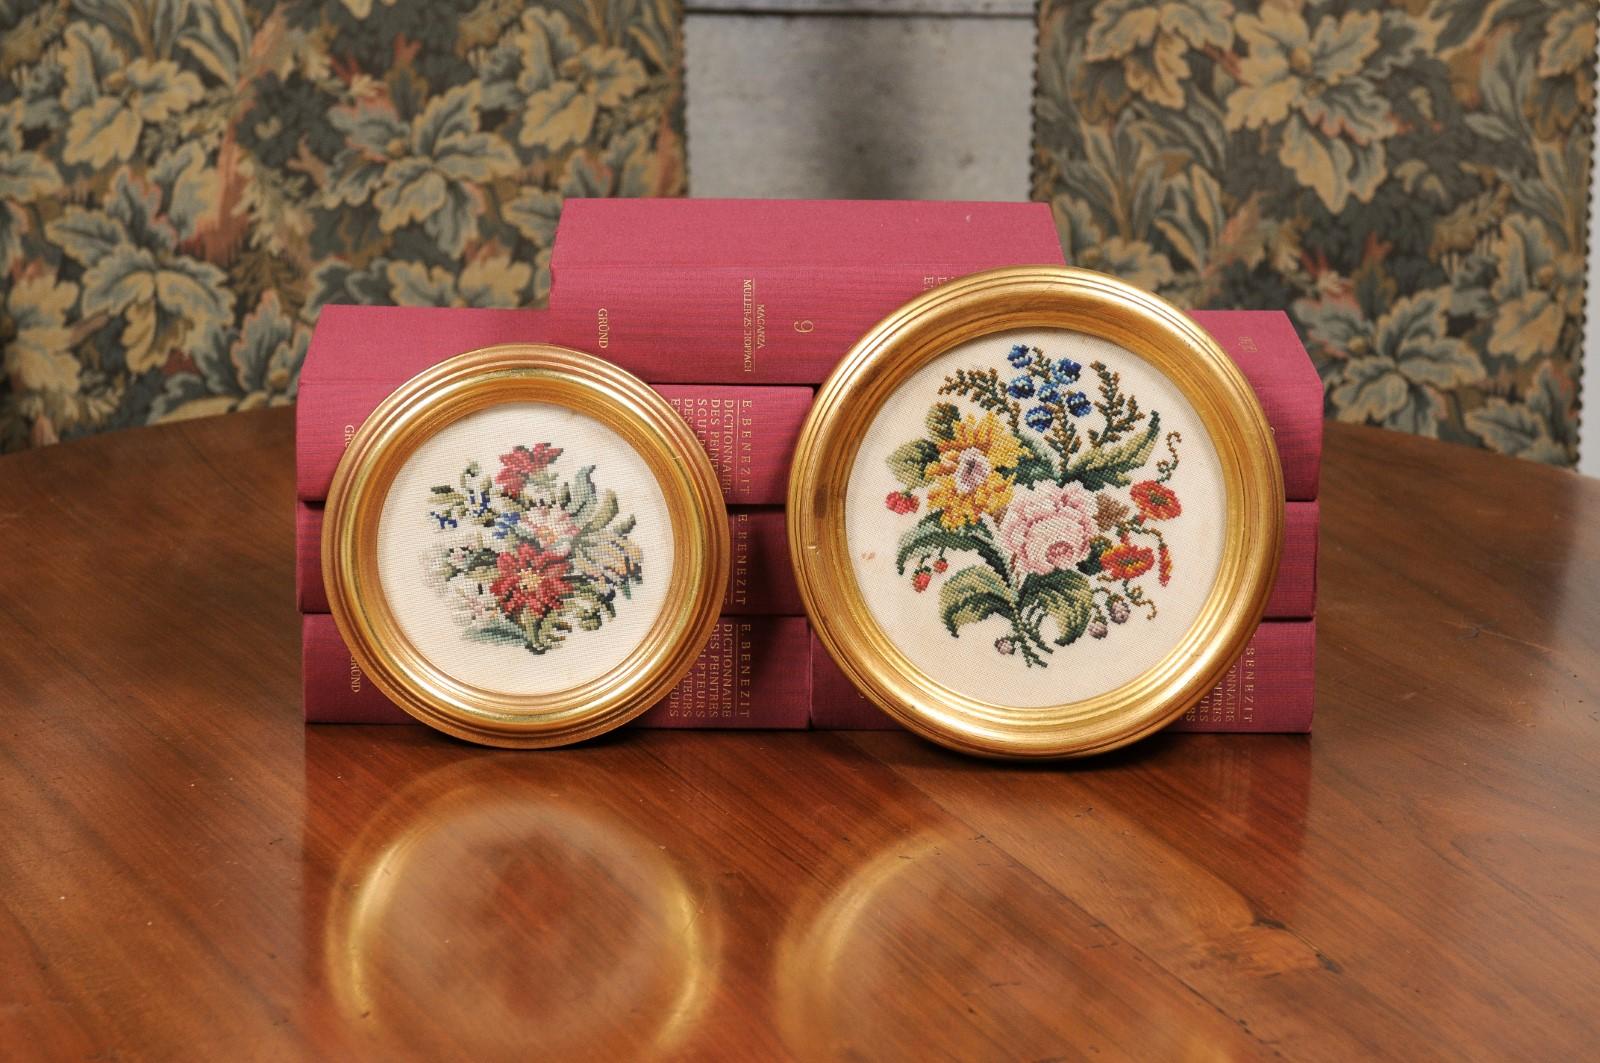 A pair of English Victorian period needlepoint tapestry floral wall hangings from the 19th century, in gilded circular frames. Originally found in Cornwall, each of this pair of wall hangings features a bouquet of pink, red and yellow flowers with